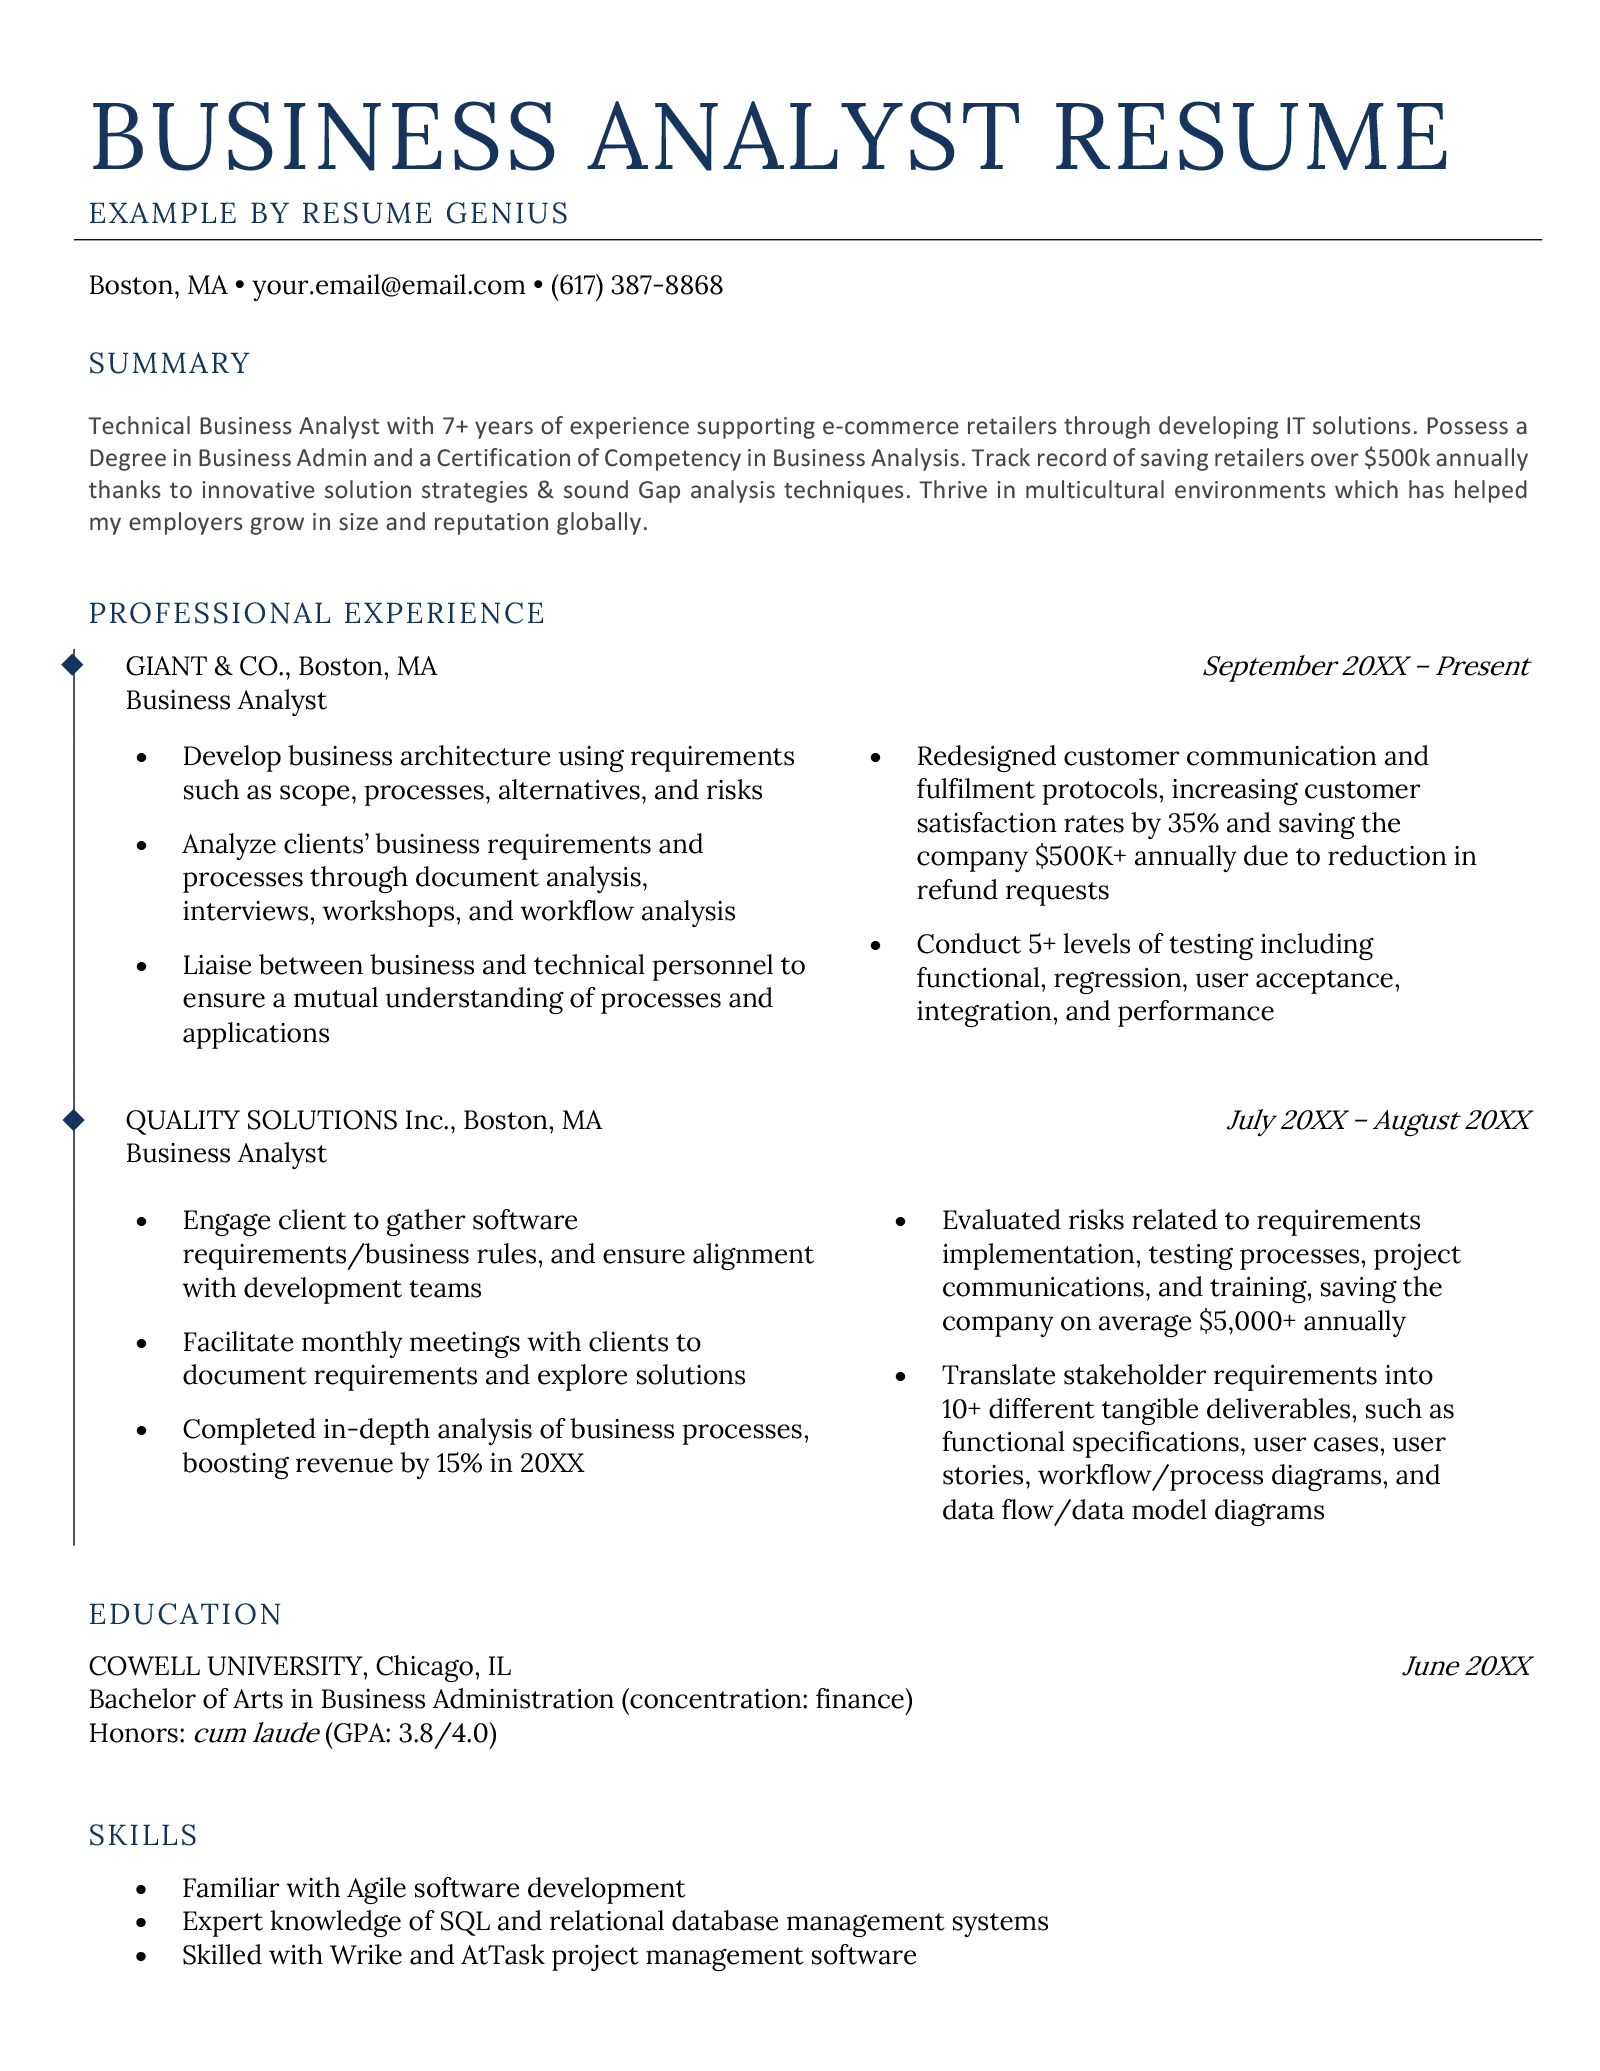 An example of a business analyst resume with blue text and a large font to help the applicant's name stand out